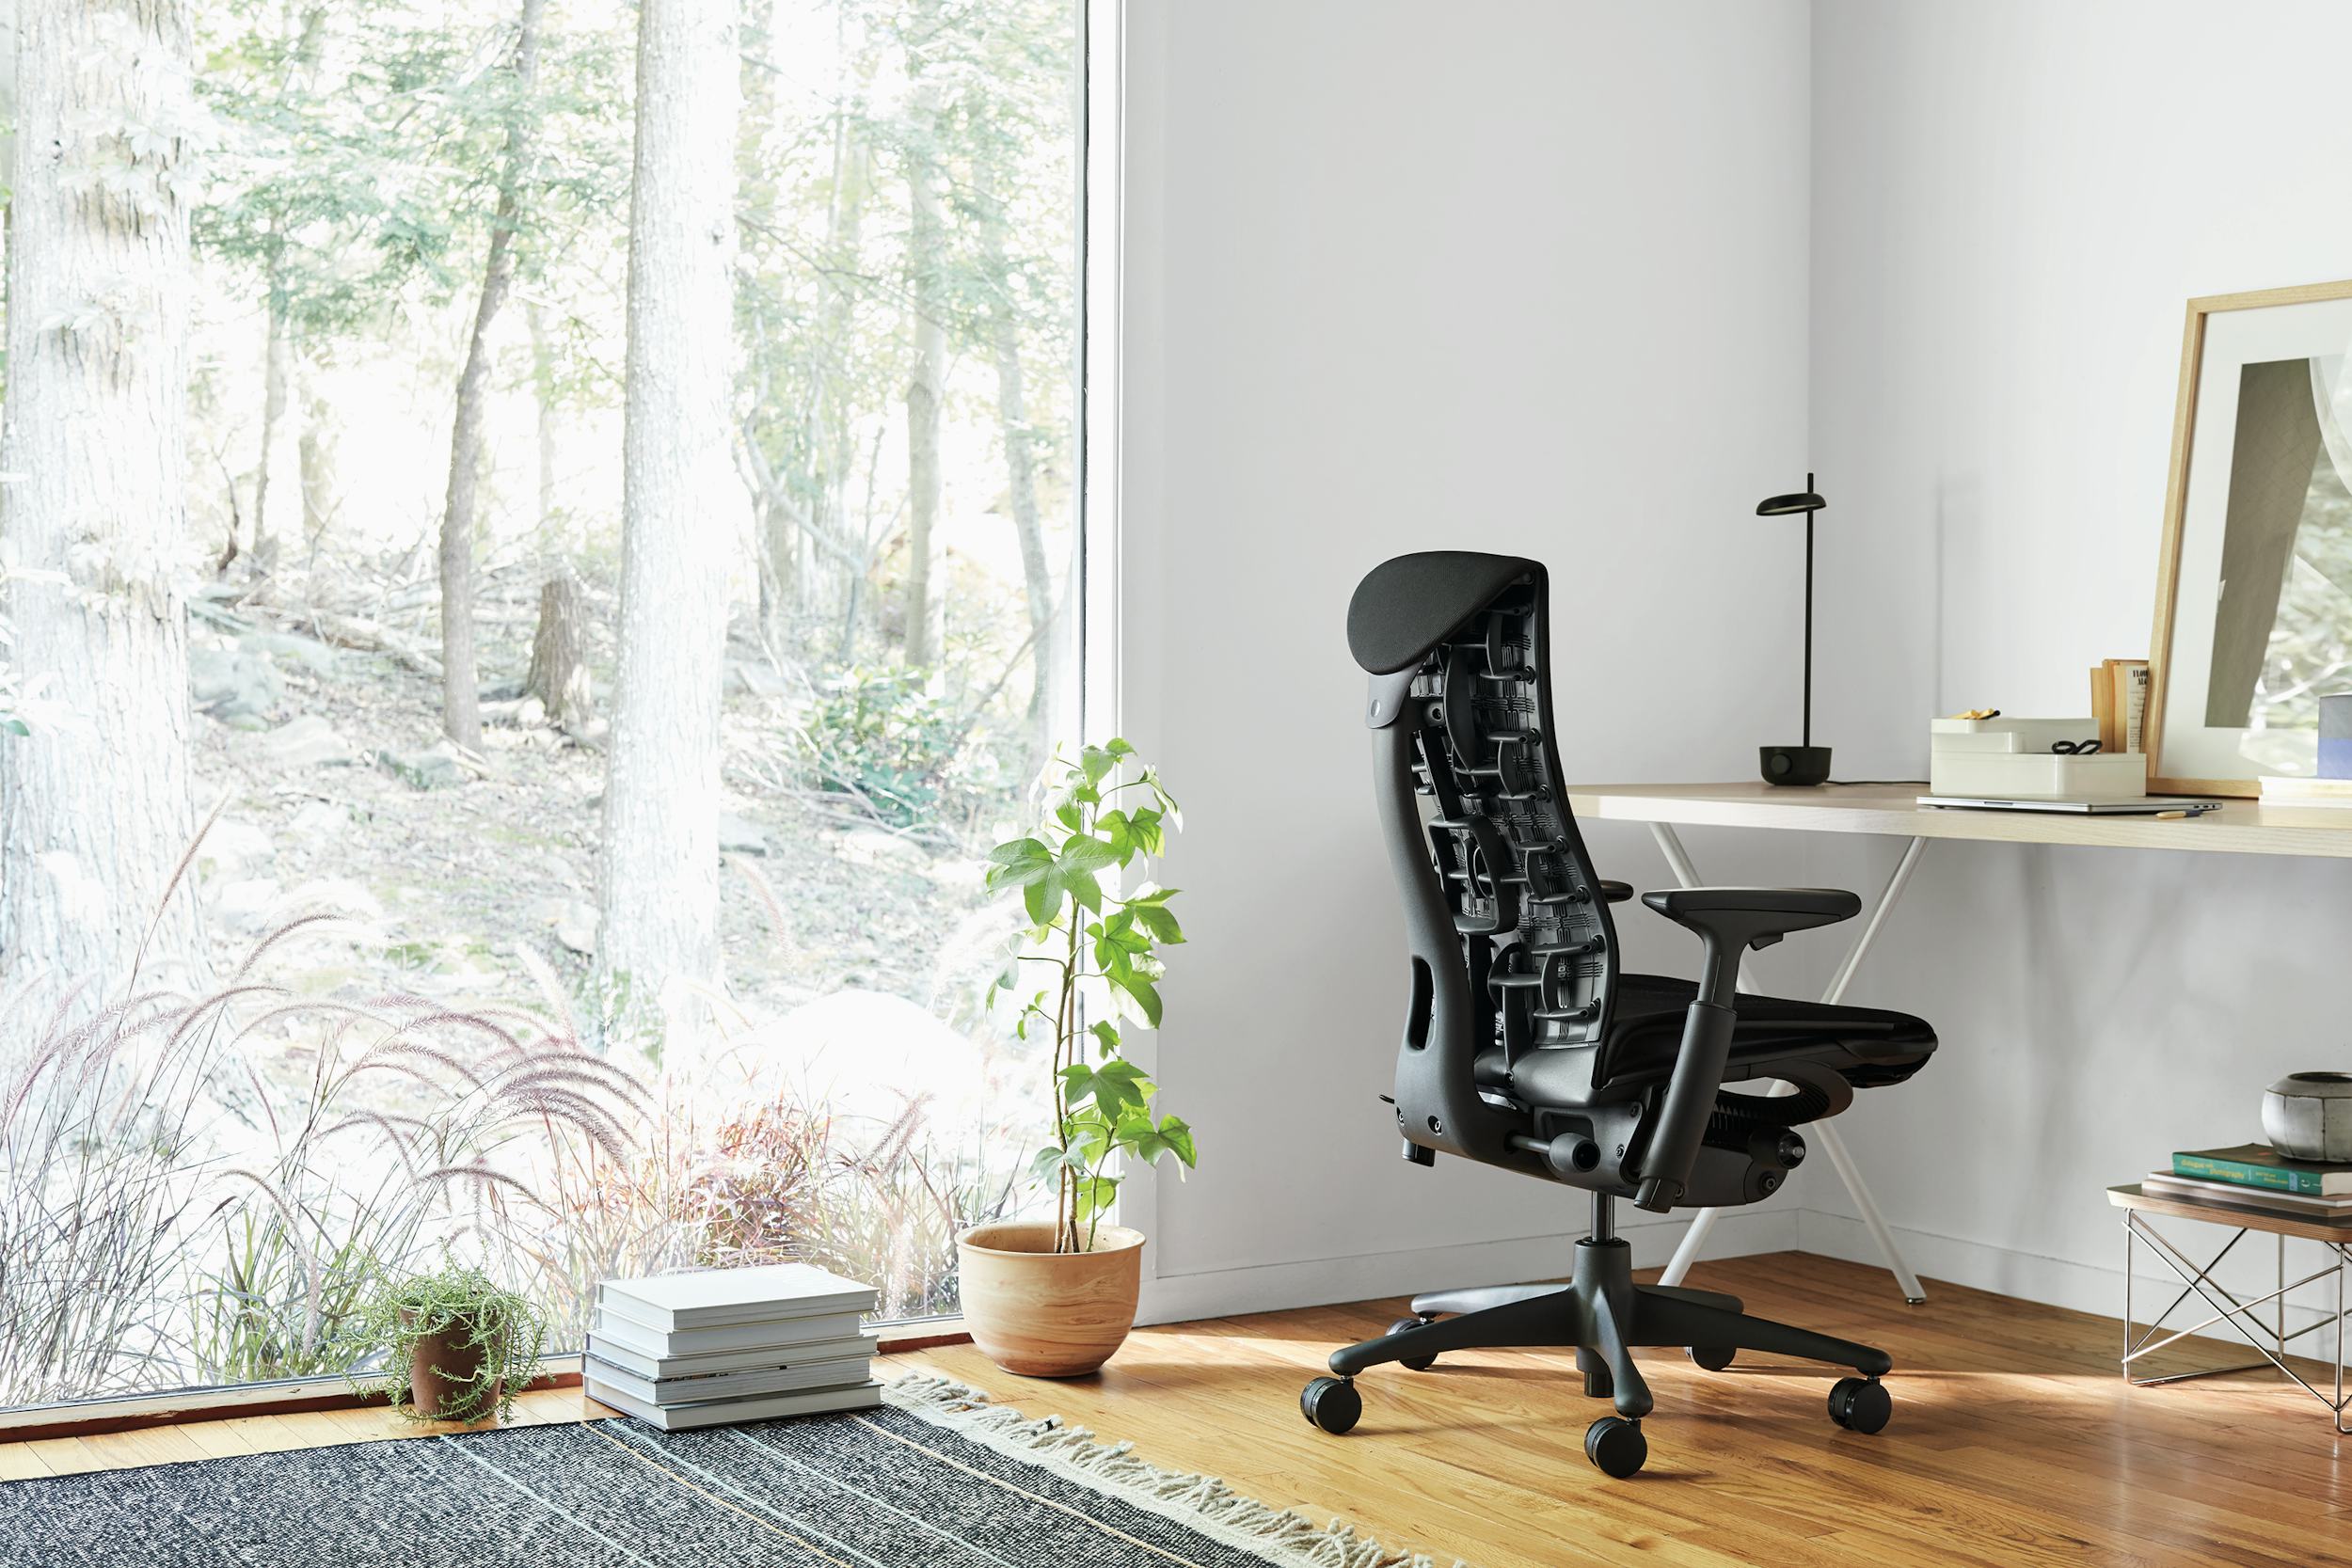 Herman Miller Embody Chair in Feather Grey